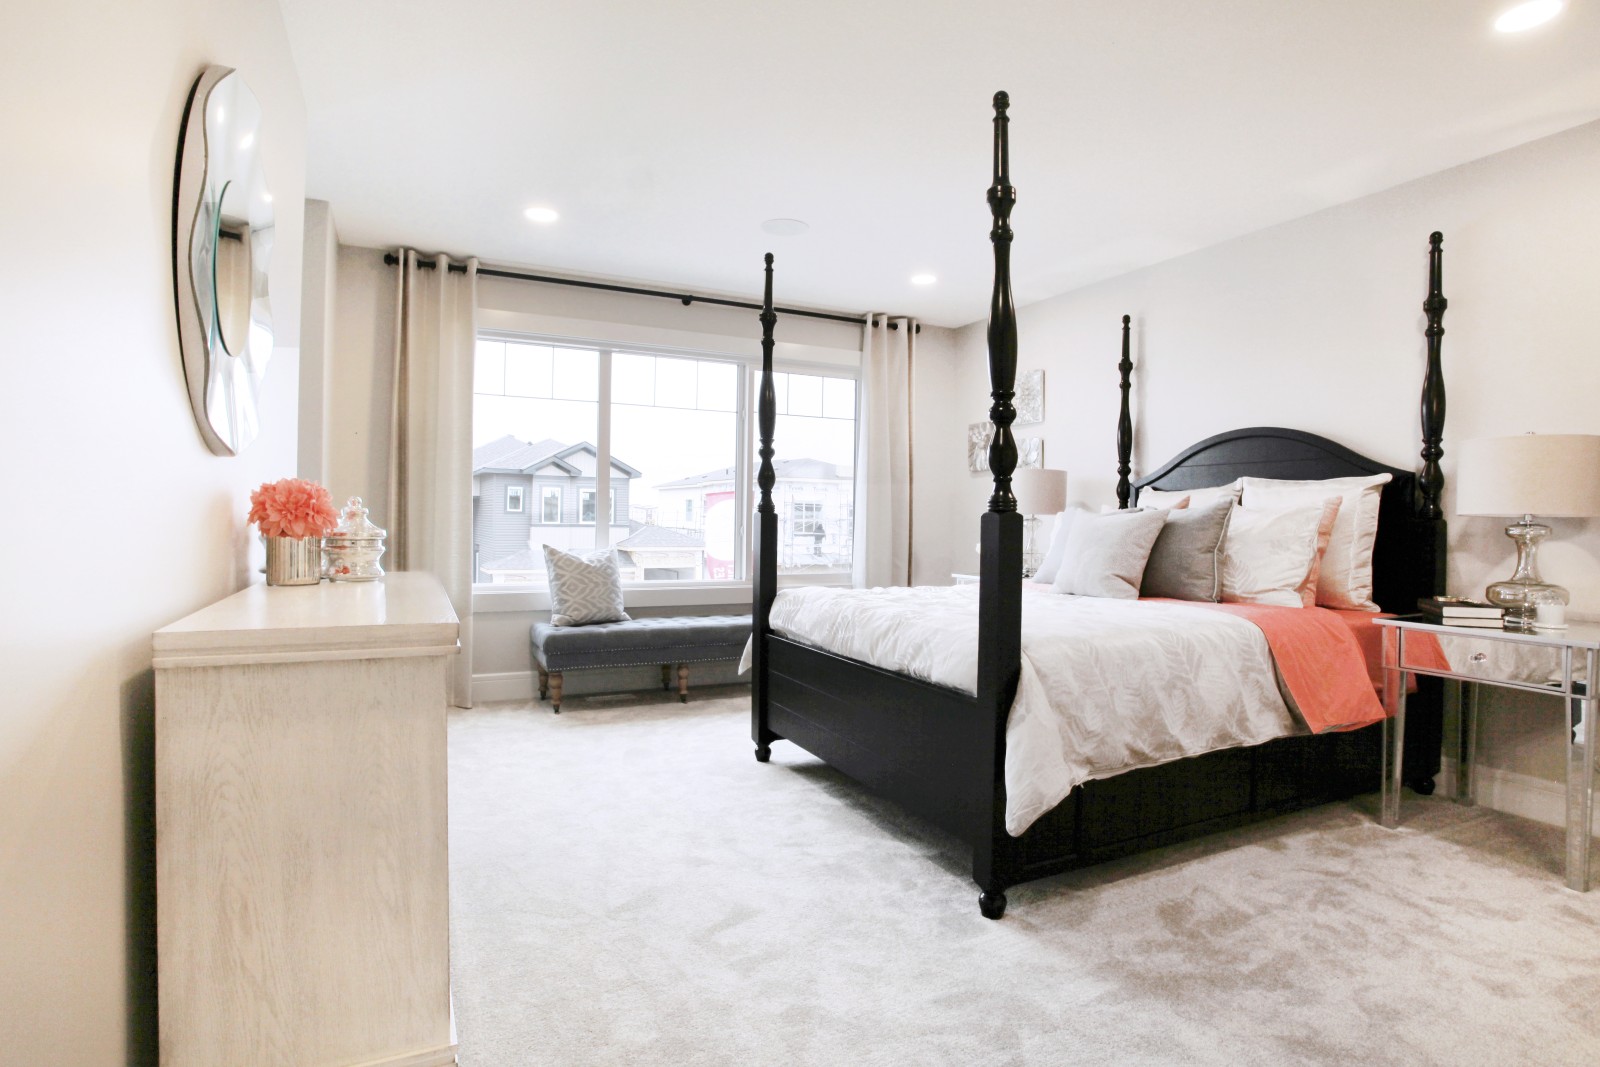 Master bedroom of the Julian showhome with large windows at the front of the room, a dark four-poster bed with light bedding and pops of coral accents